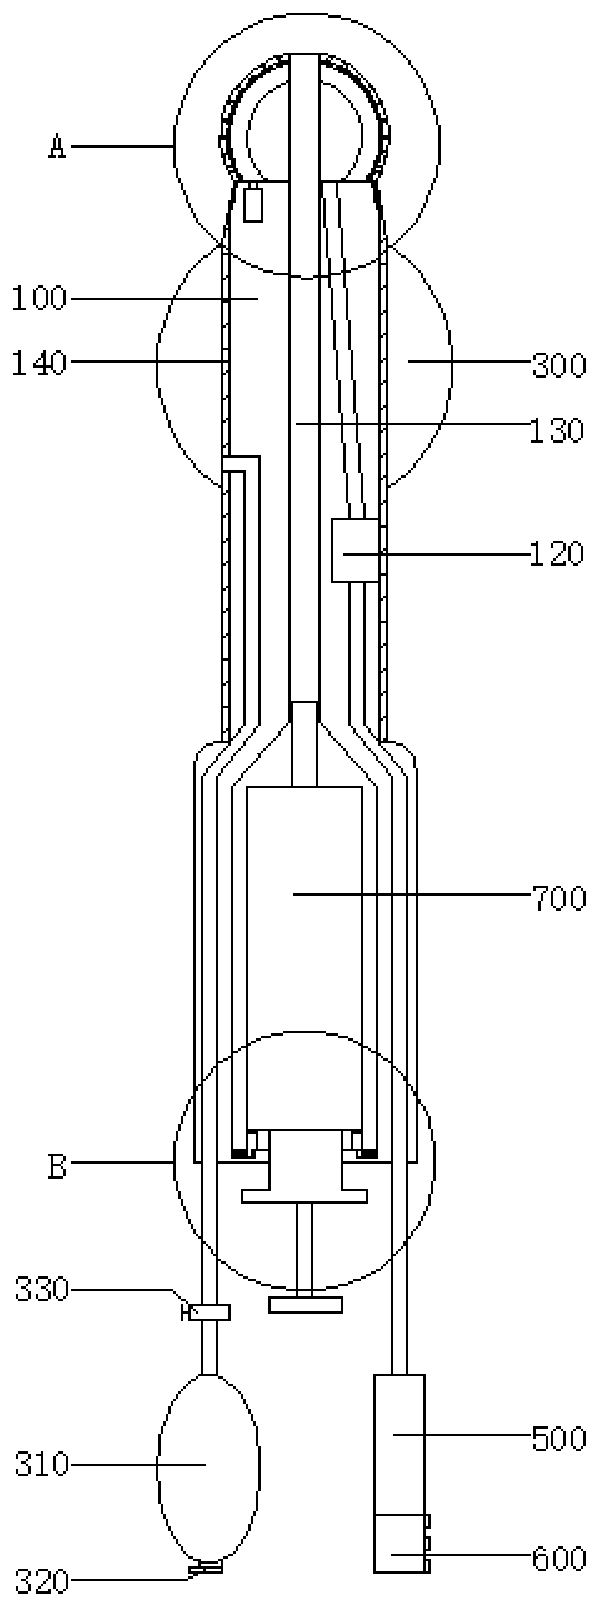 Artificial insemination transplanting device for reproductive medicine